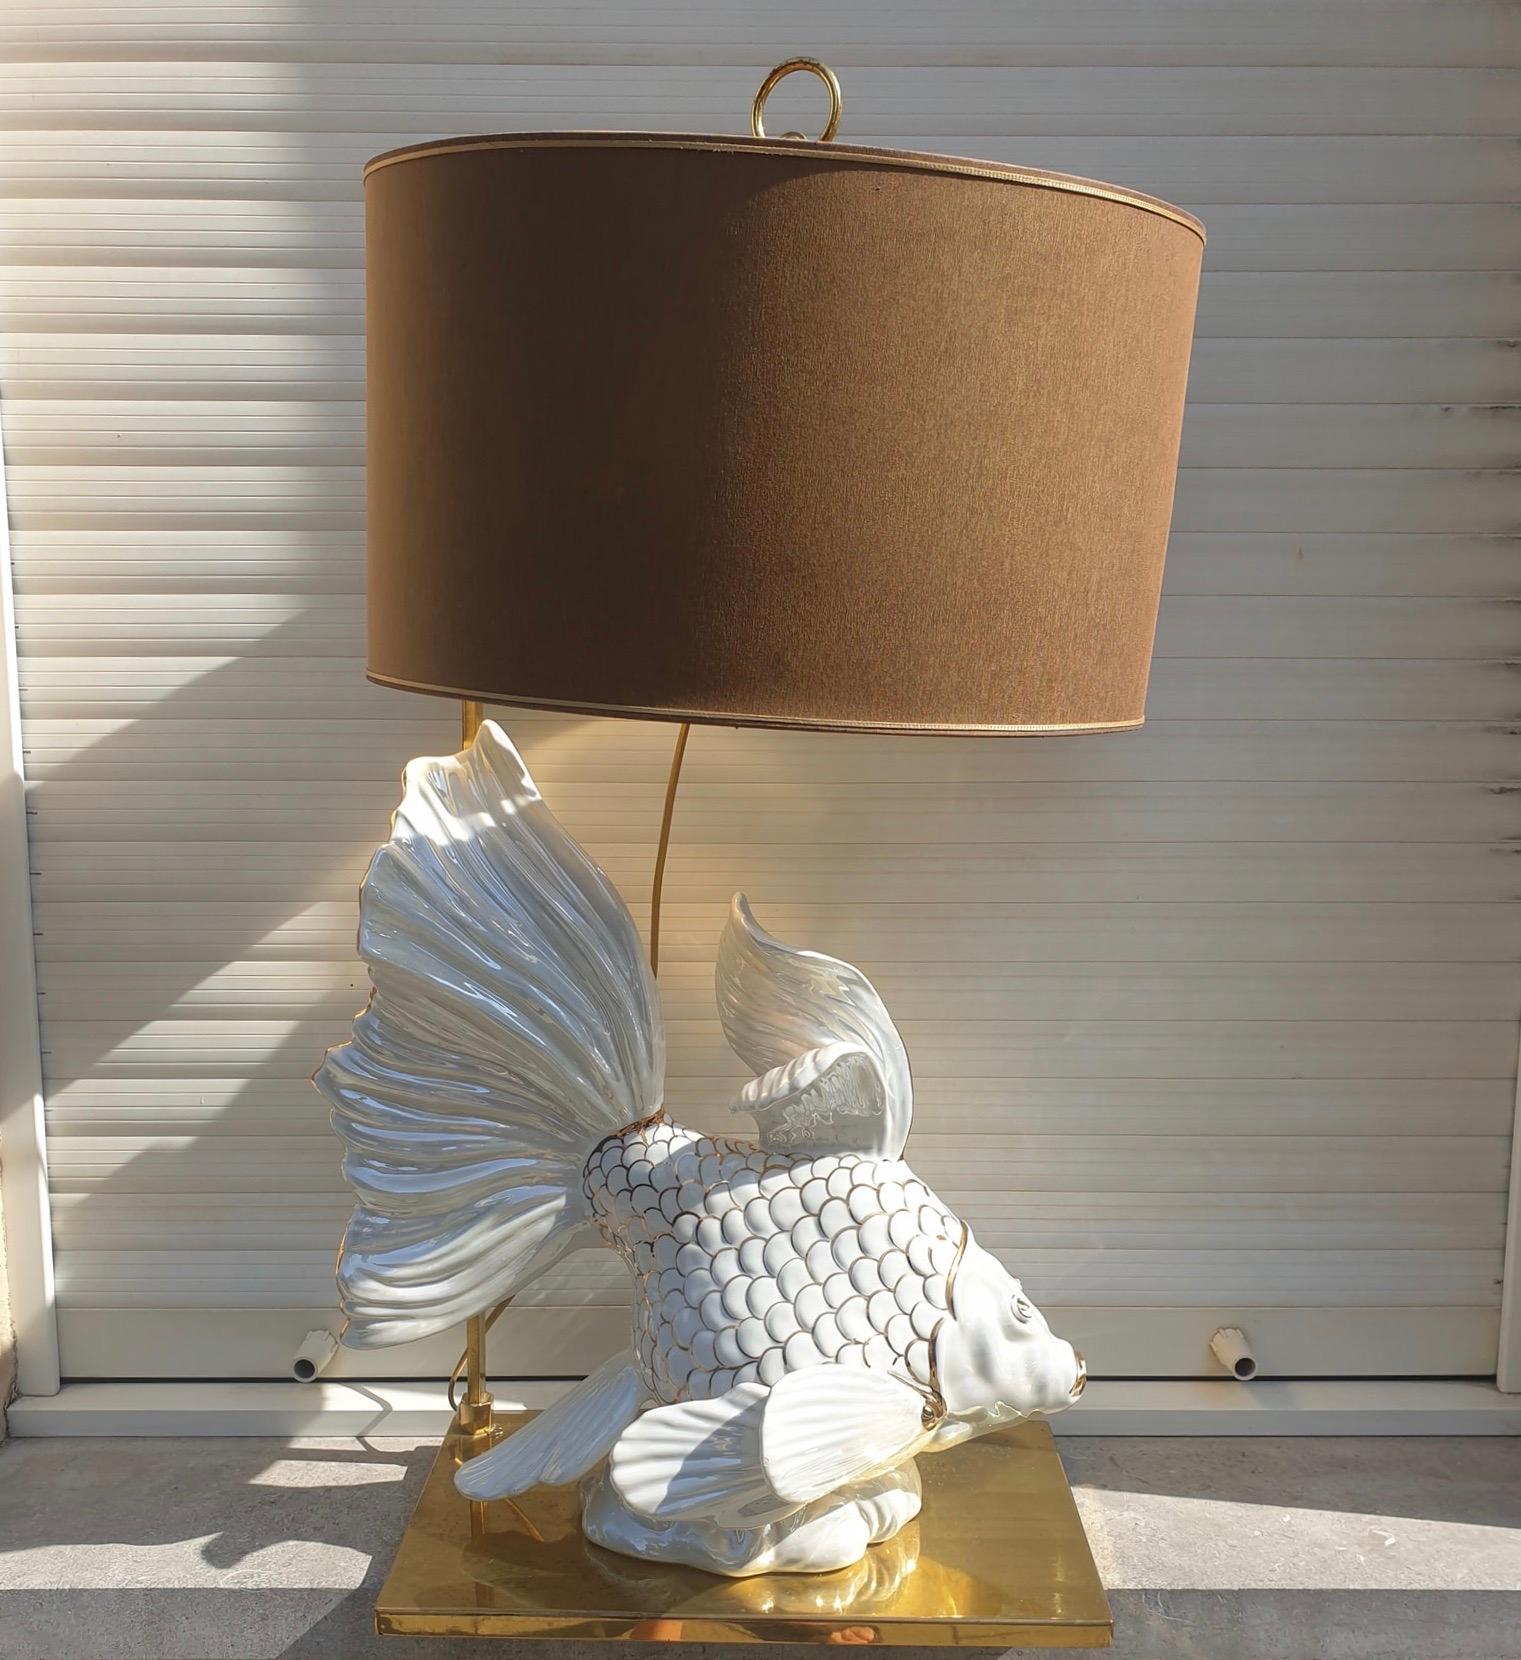 Italian Midcentury Big Ceramic Fish Lamp with Brass Details, 1970s For Sale 2